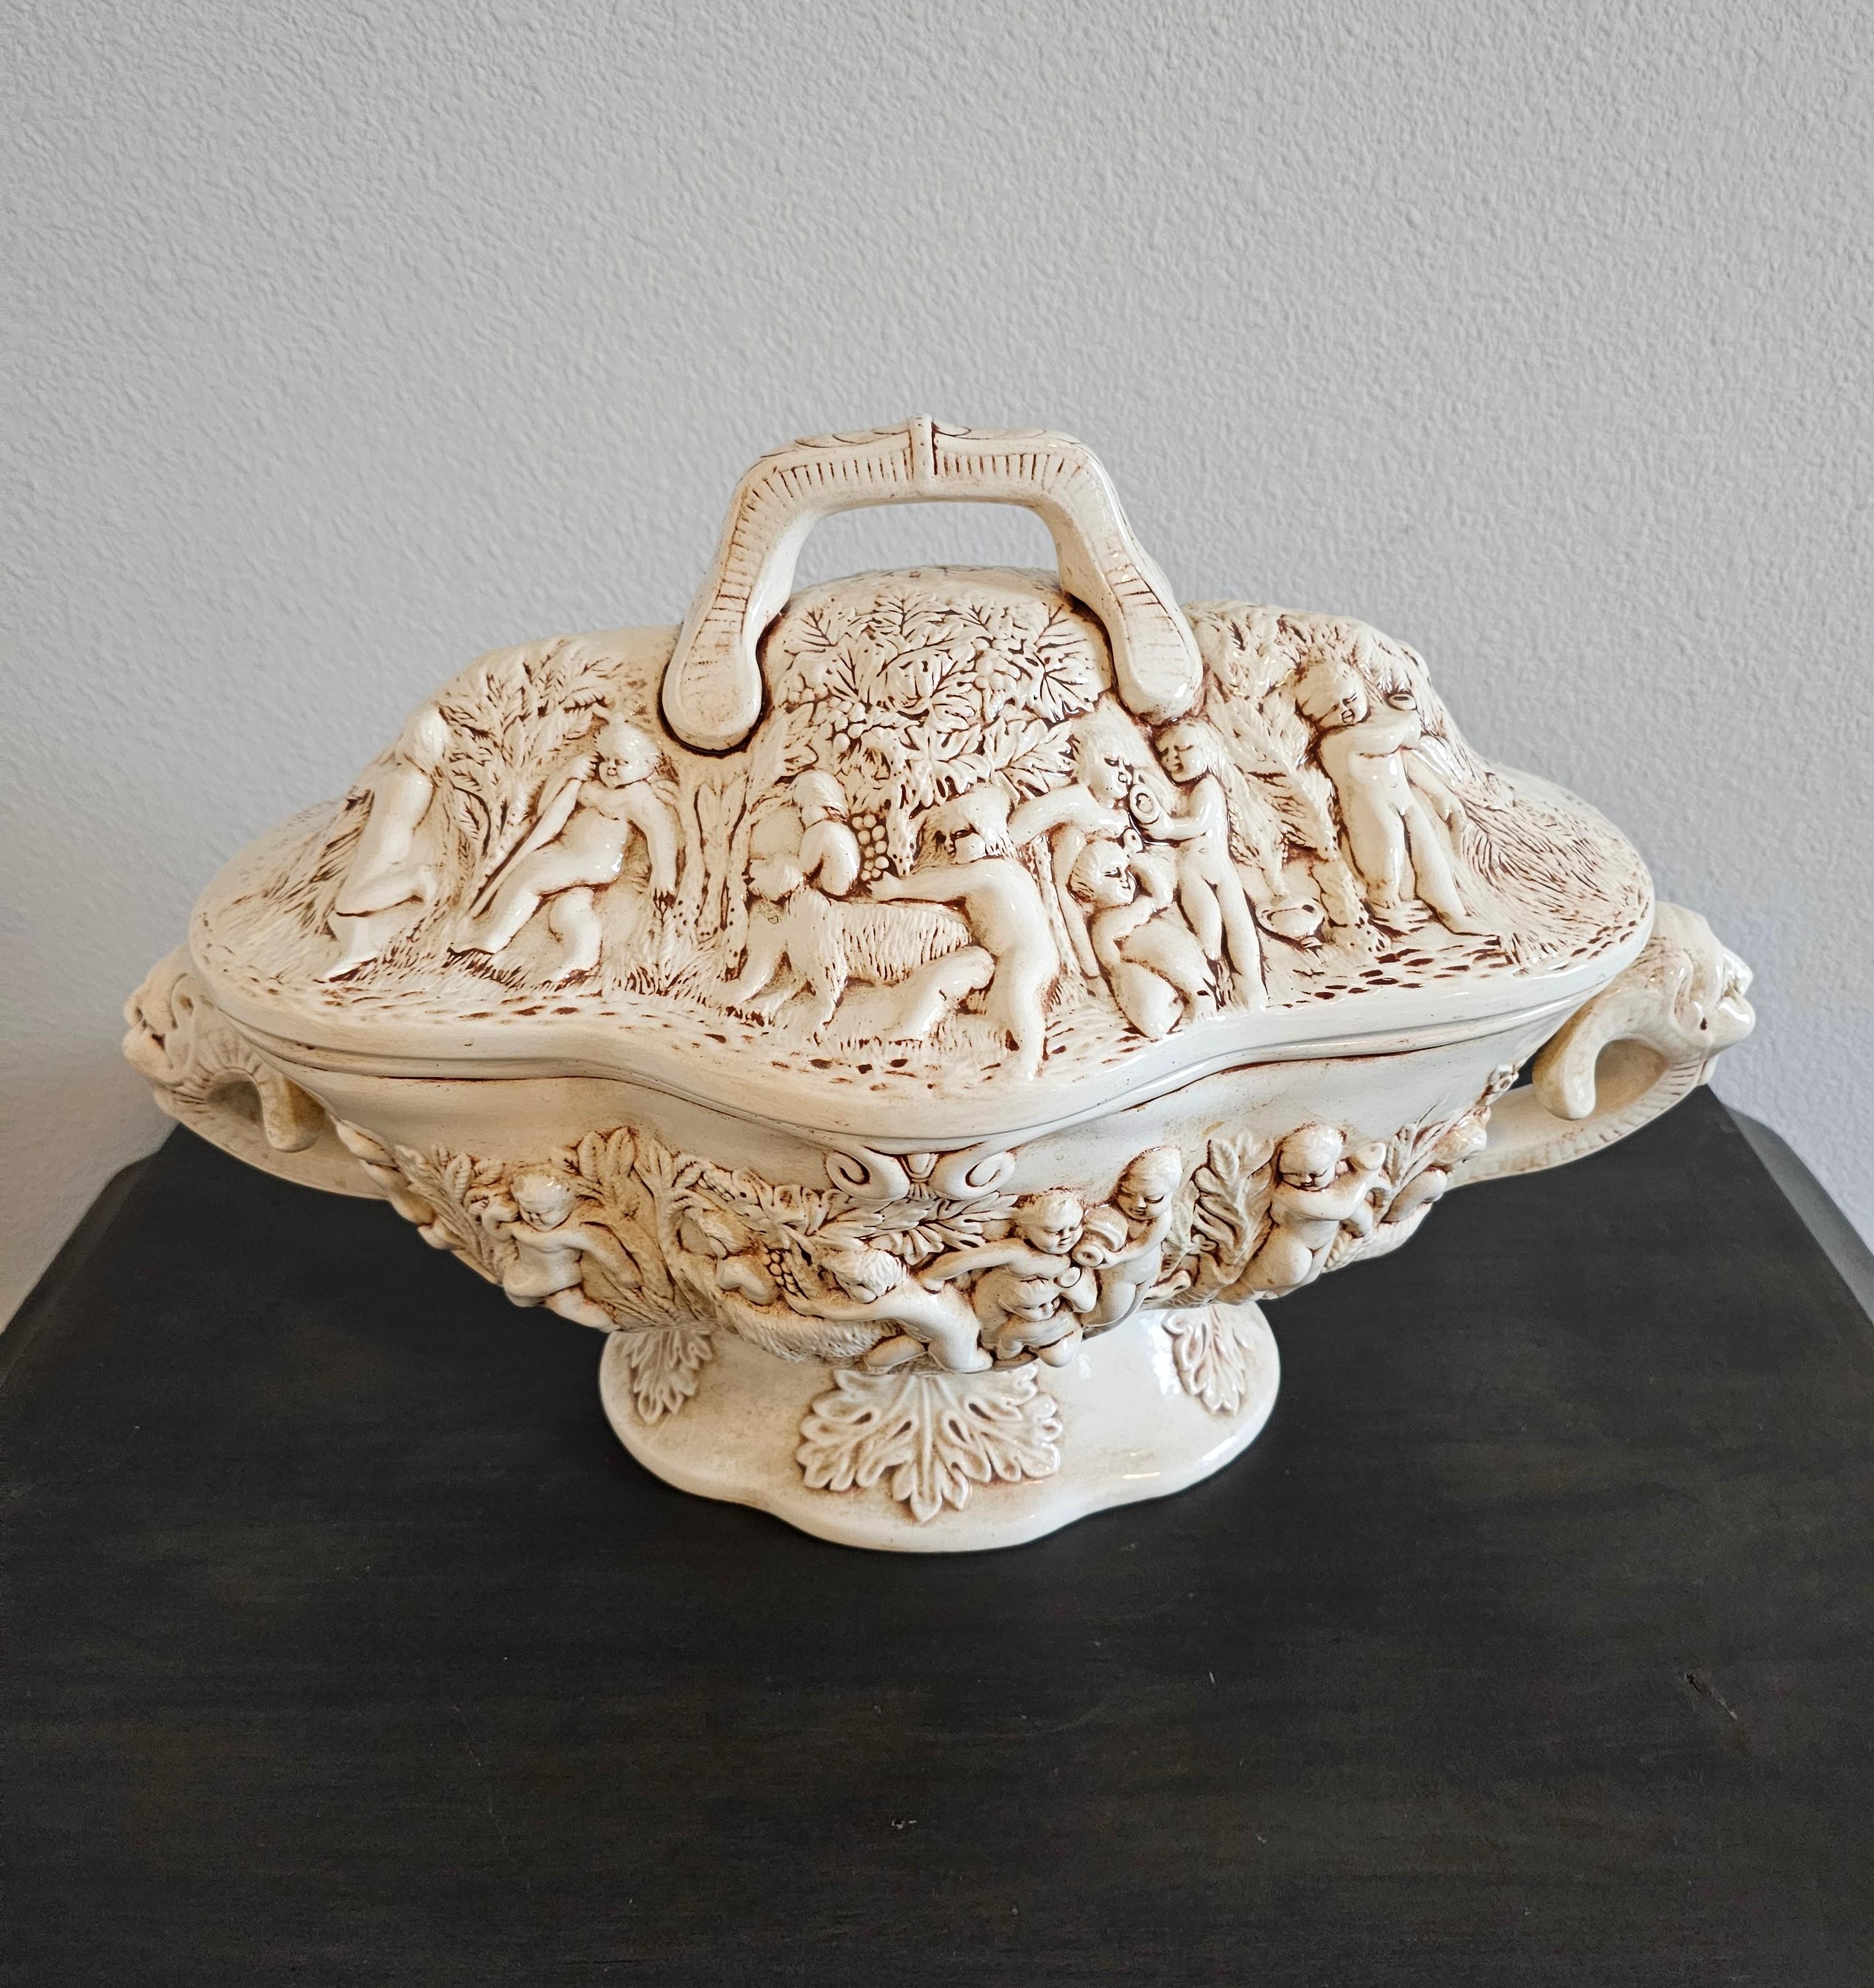 Vintage Italian Capodimonte Porcelain Covered Serving Dish Large Soup Tureen In Good Condition For Sale In Forney, TX